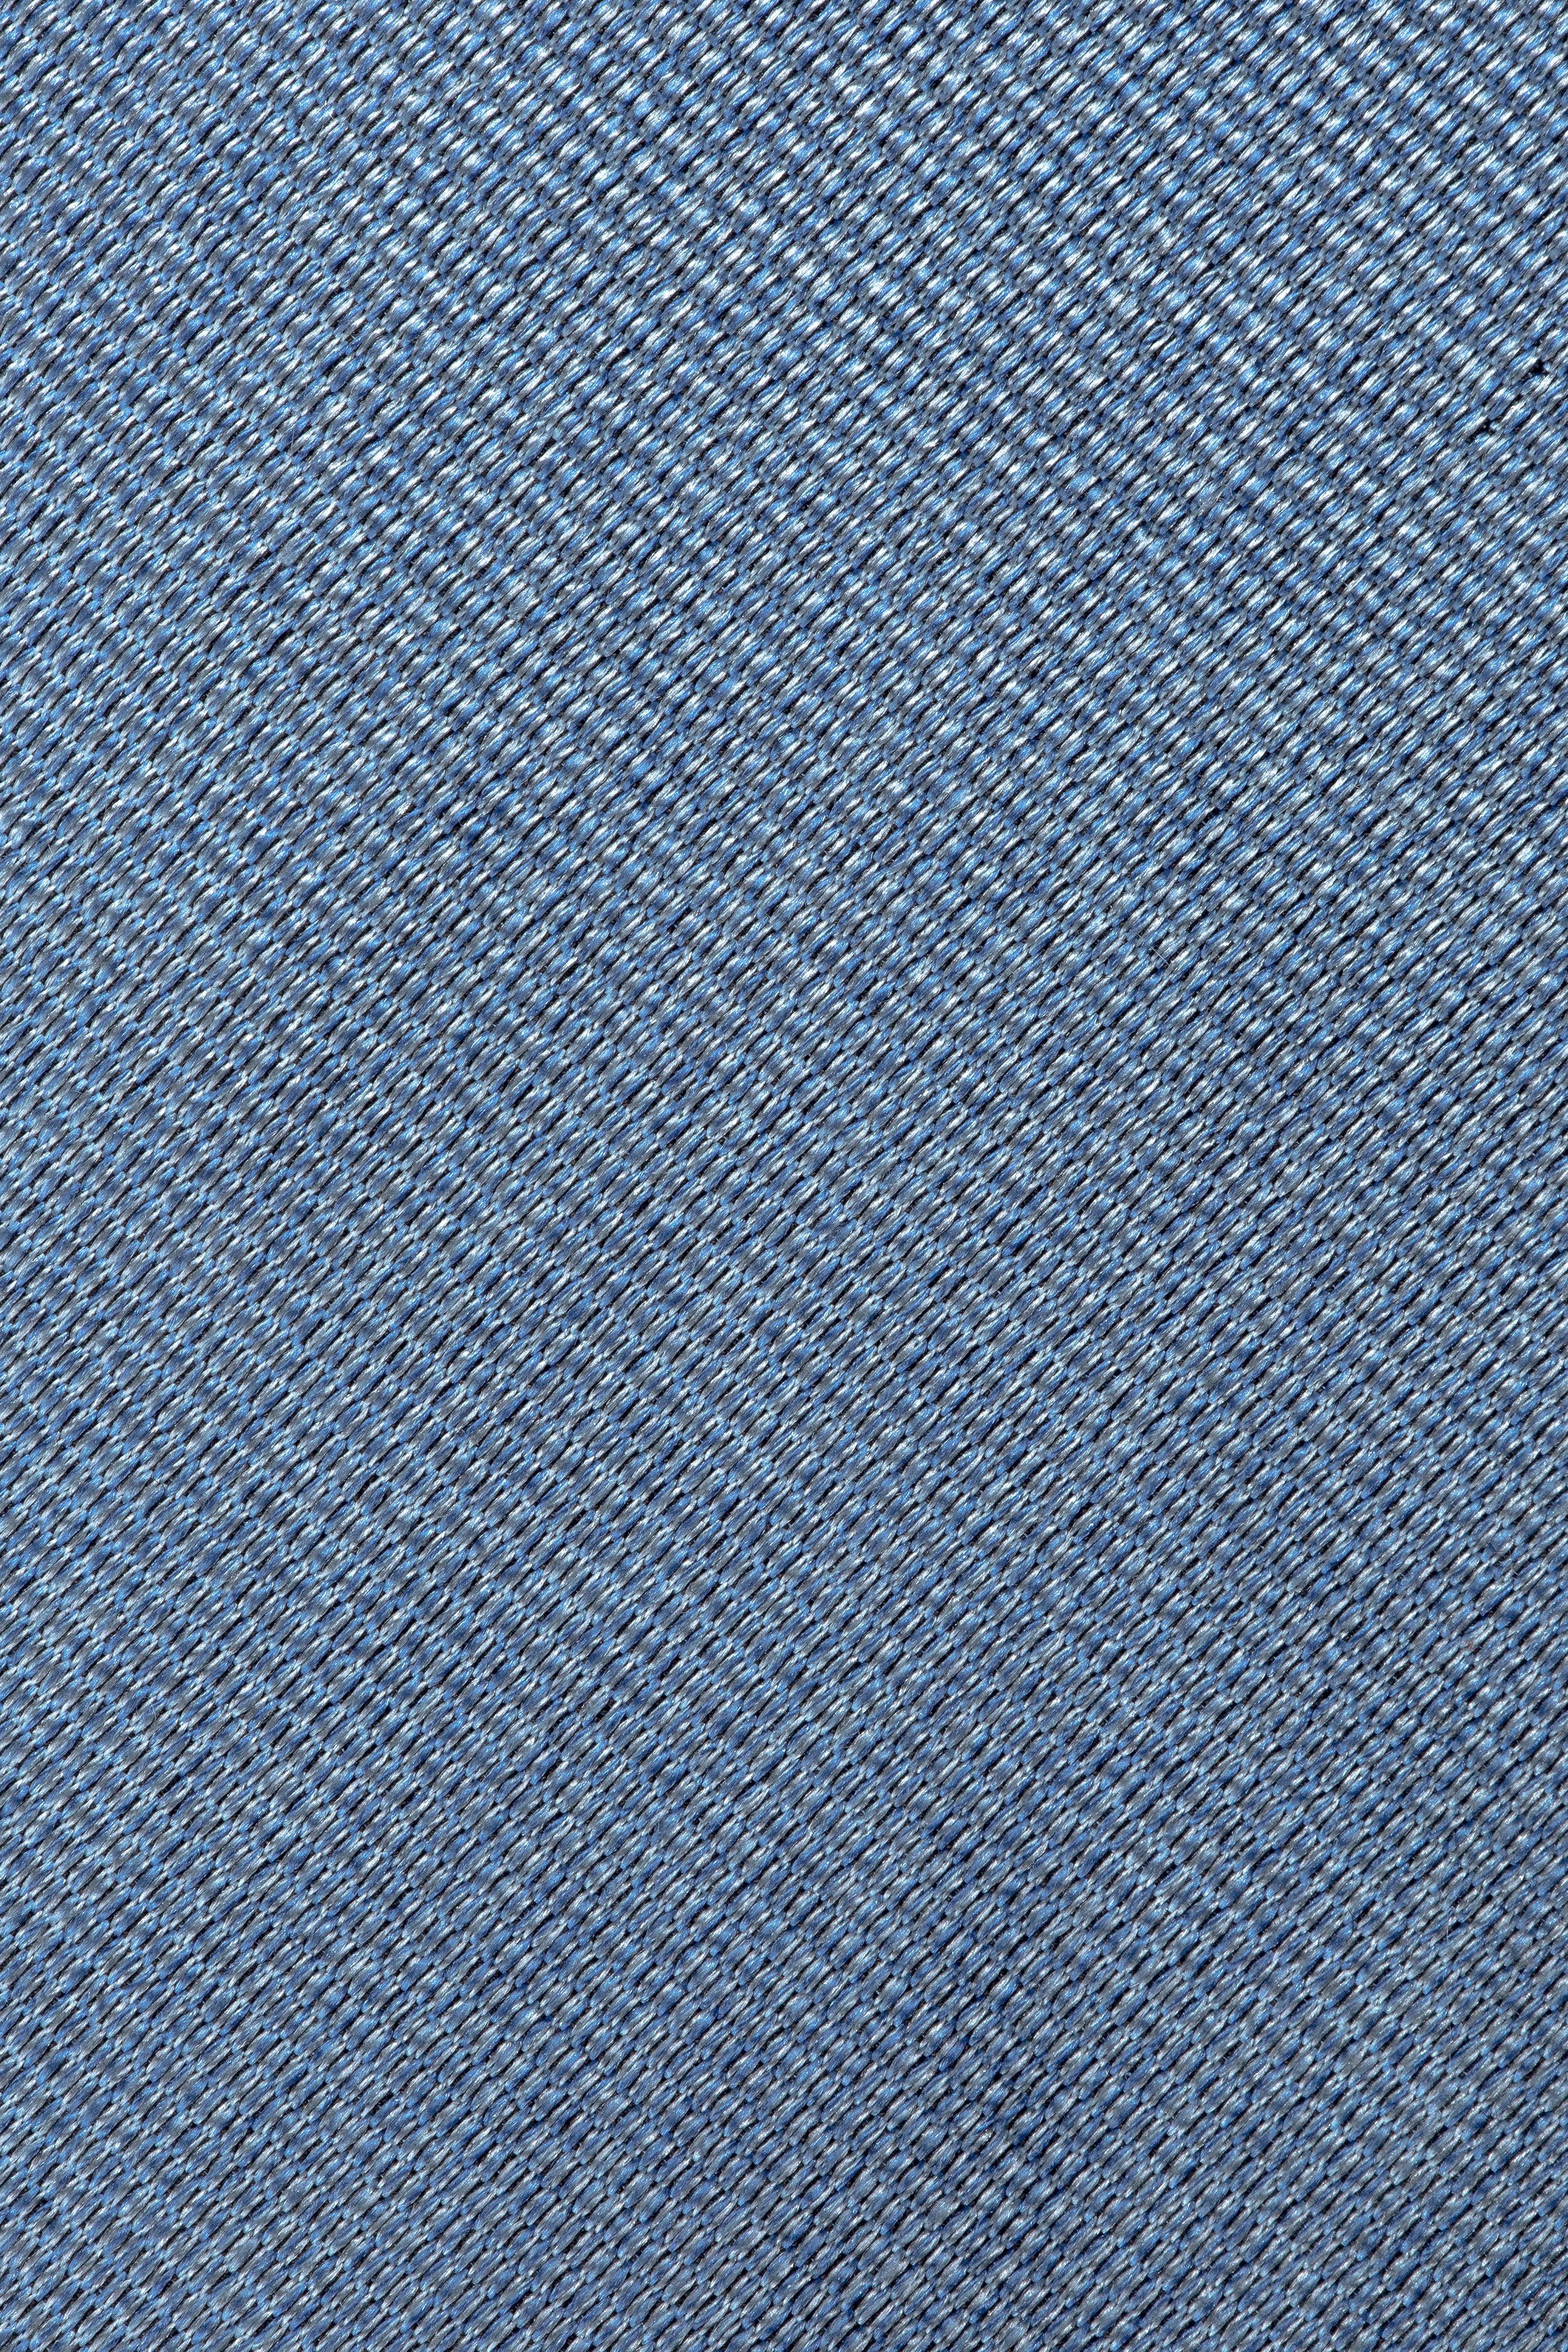 Alt view 1 Bowman Solid Woven Tie in Blue